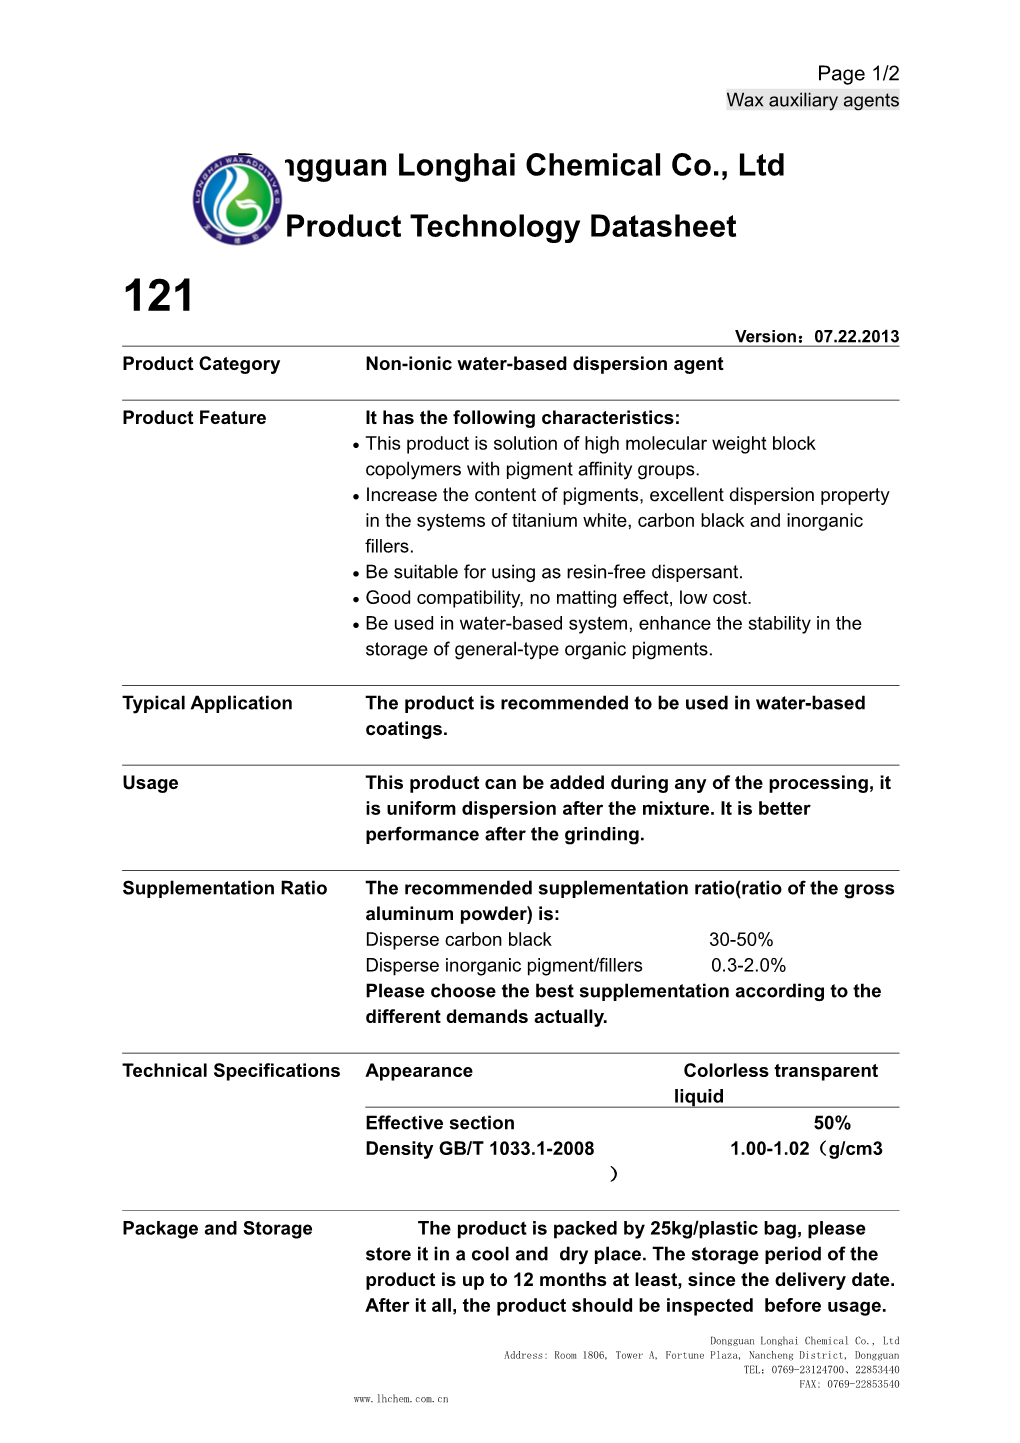 Data Sheet Form, 2 Pages